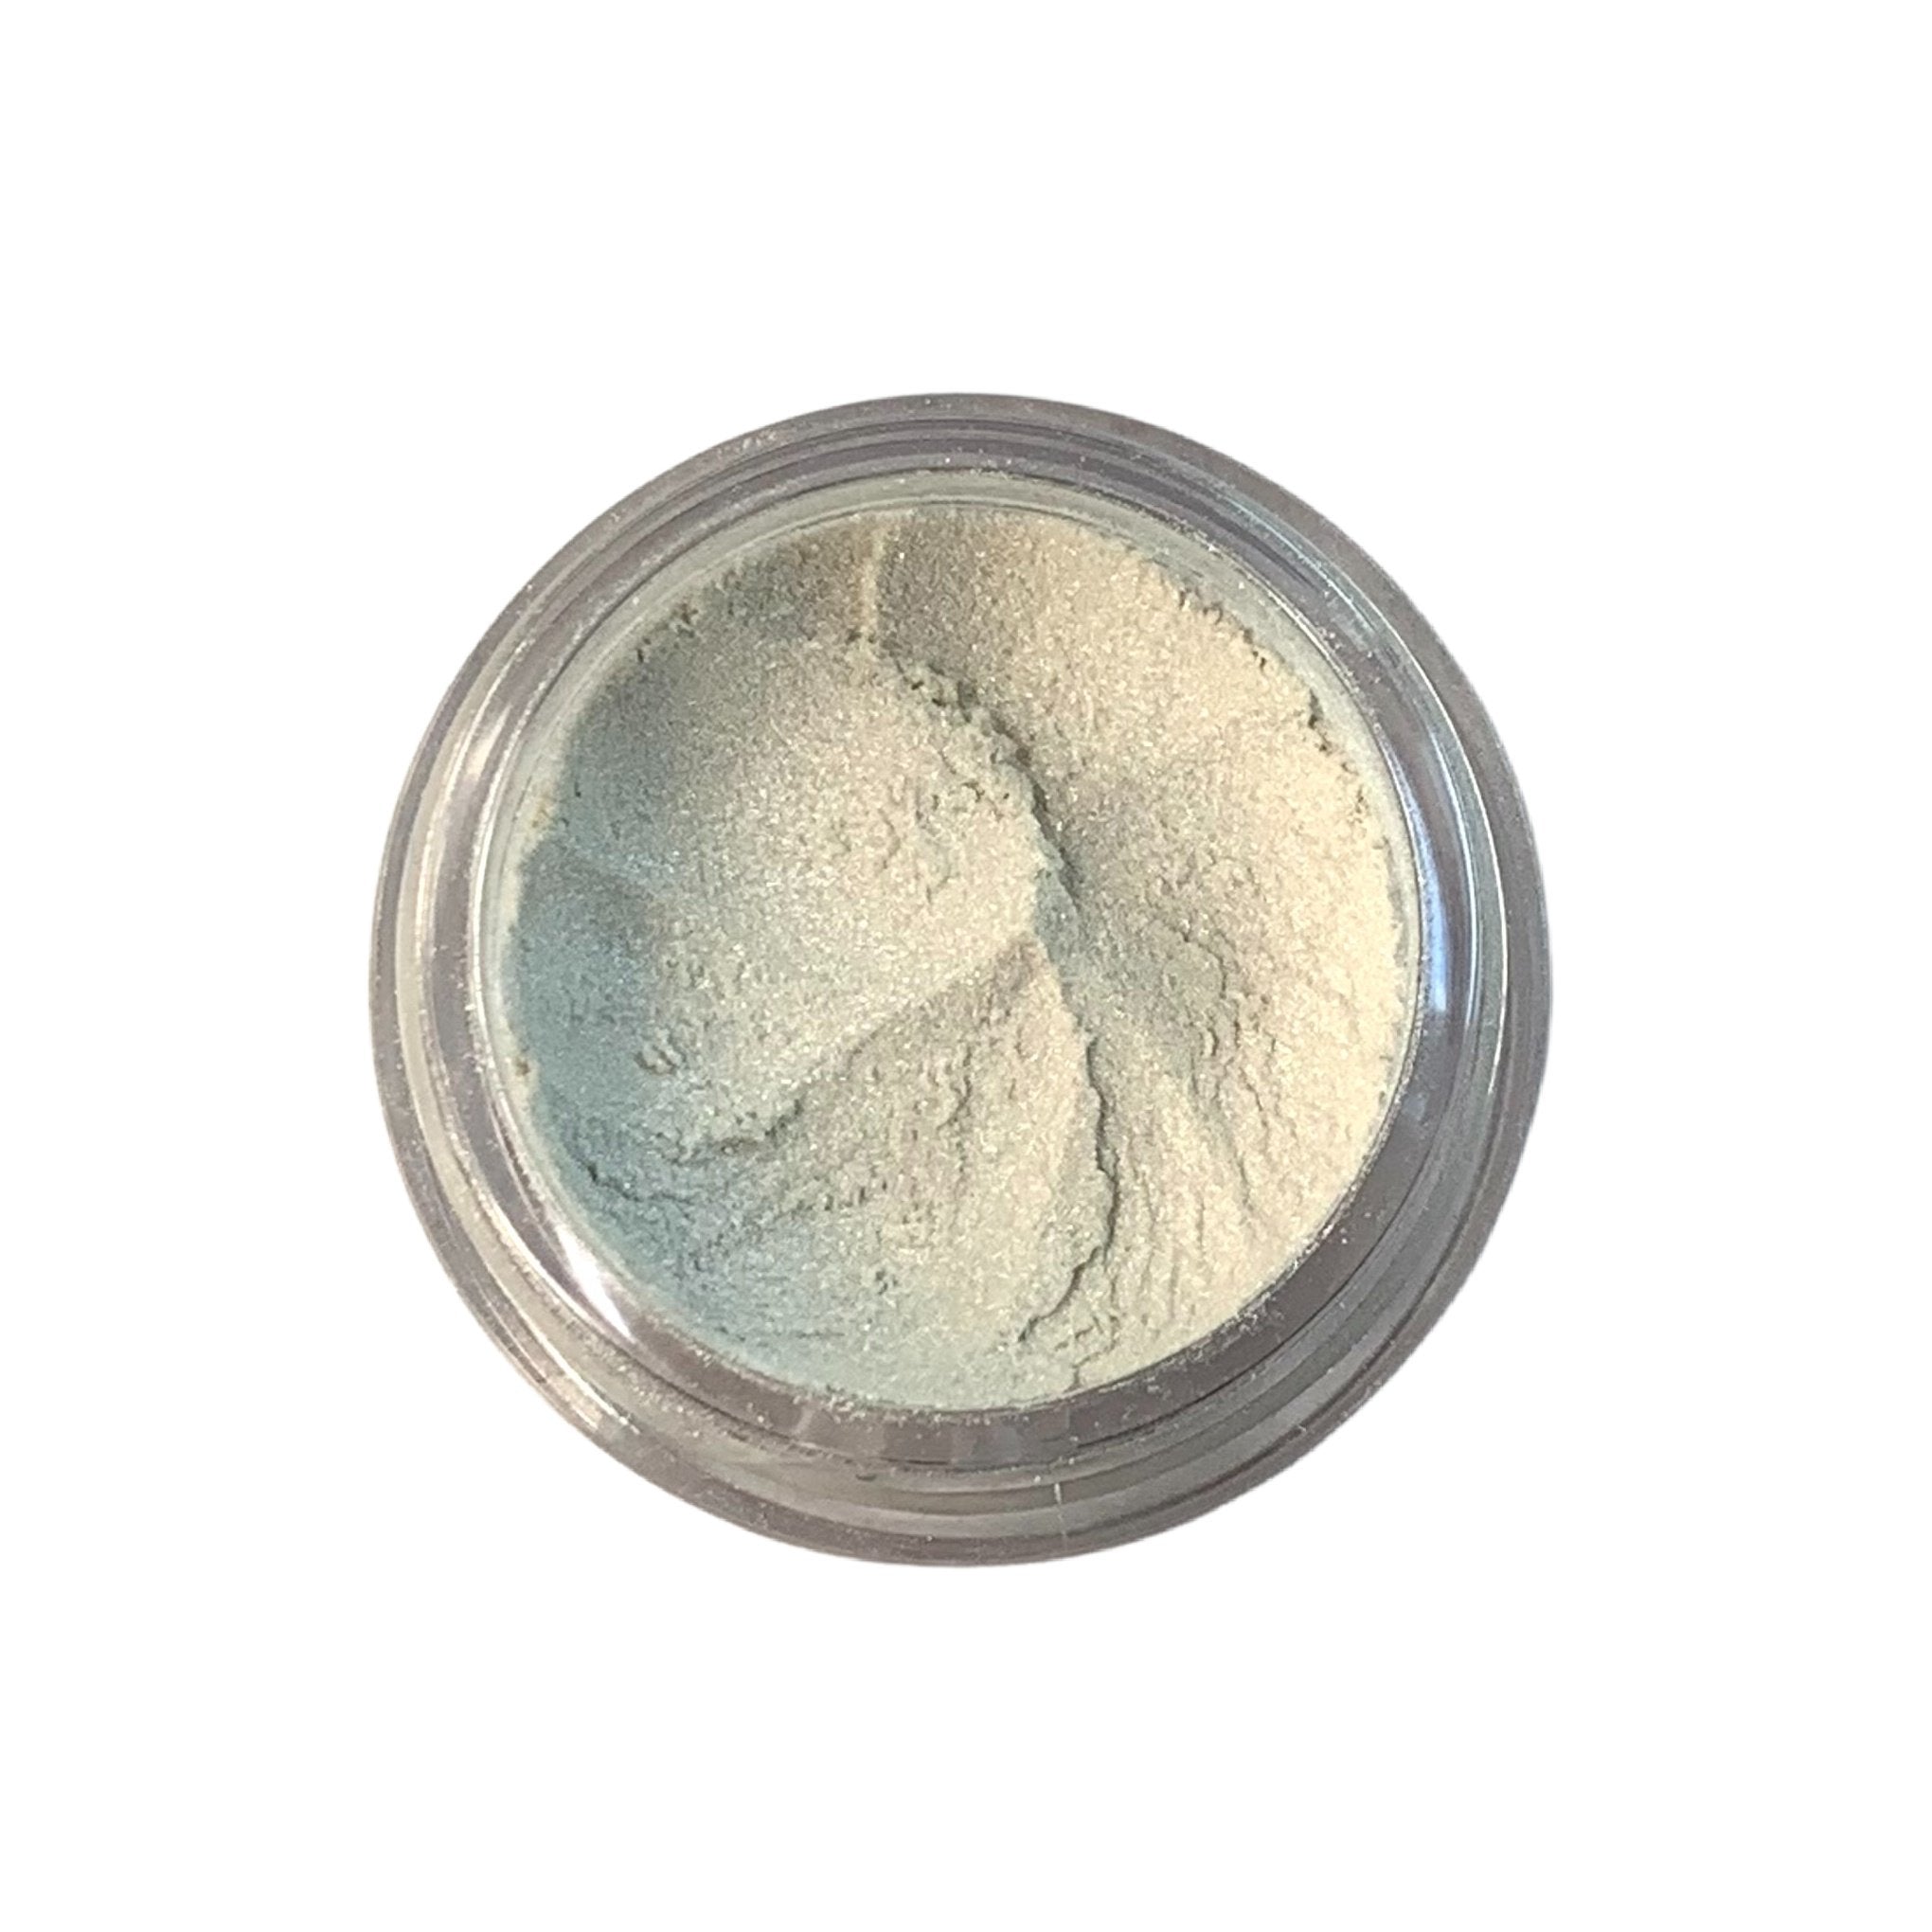 stardust - white loose mineral eyeshadow with silvery undertones. vegan and cruelty free. 10gram sifter jar